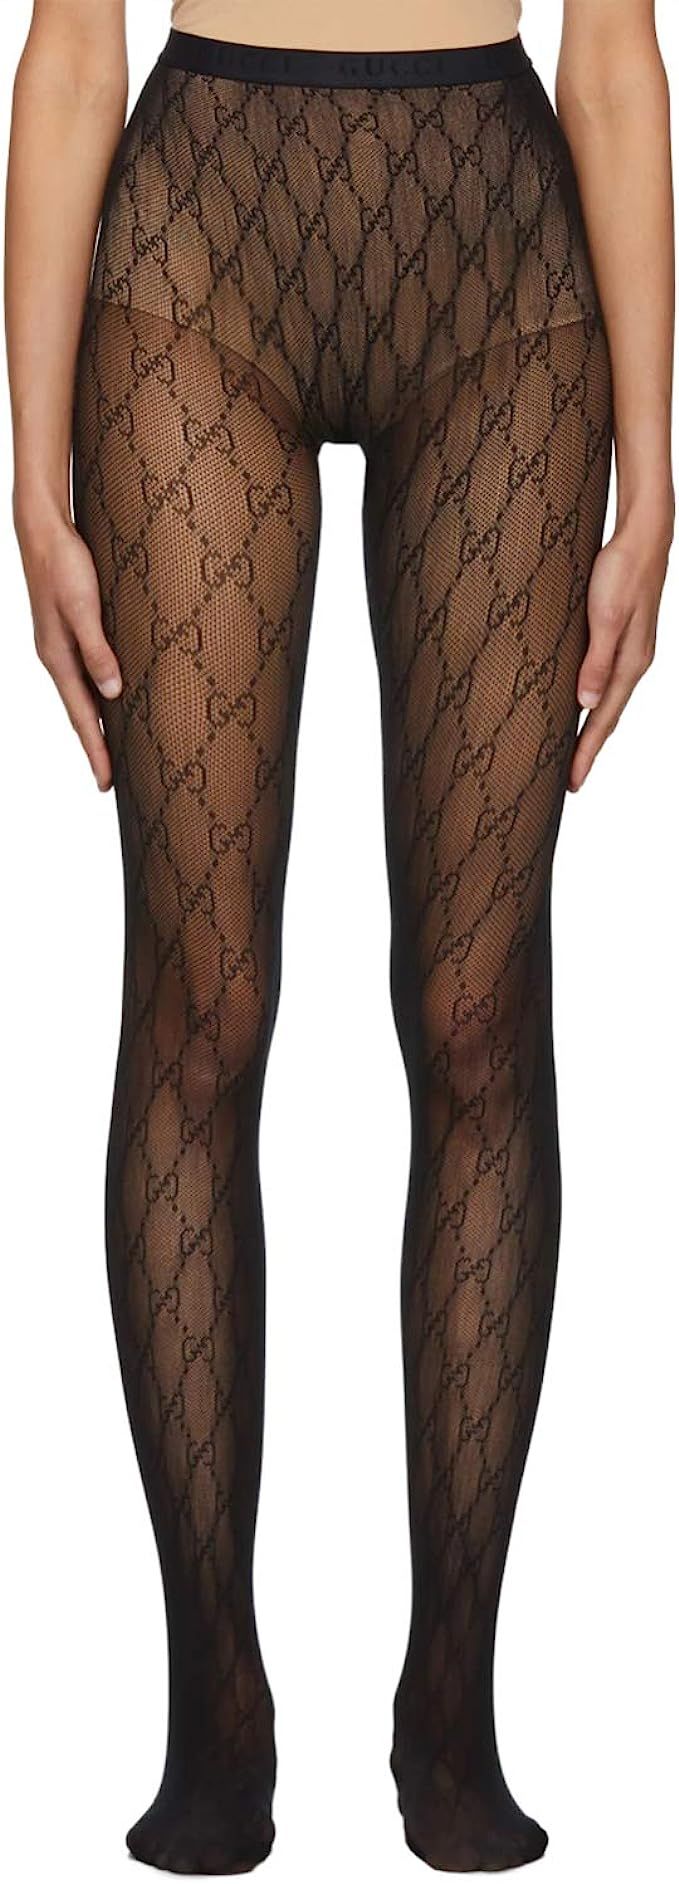 Double G Designer Inspired Lace Leggings Tights Pantyhose Stockings Hosiery in Black White Brown | Amazon (US)